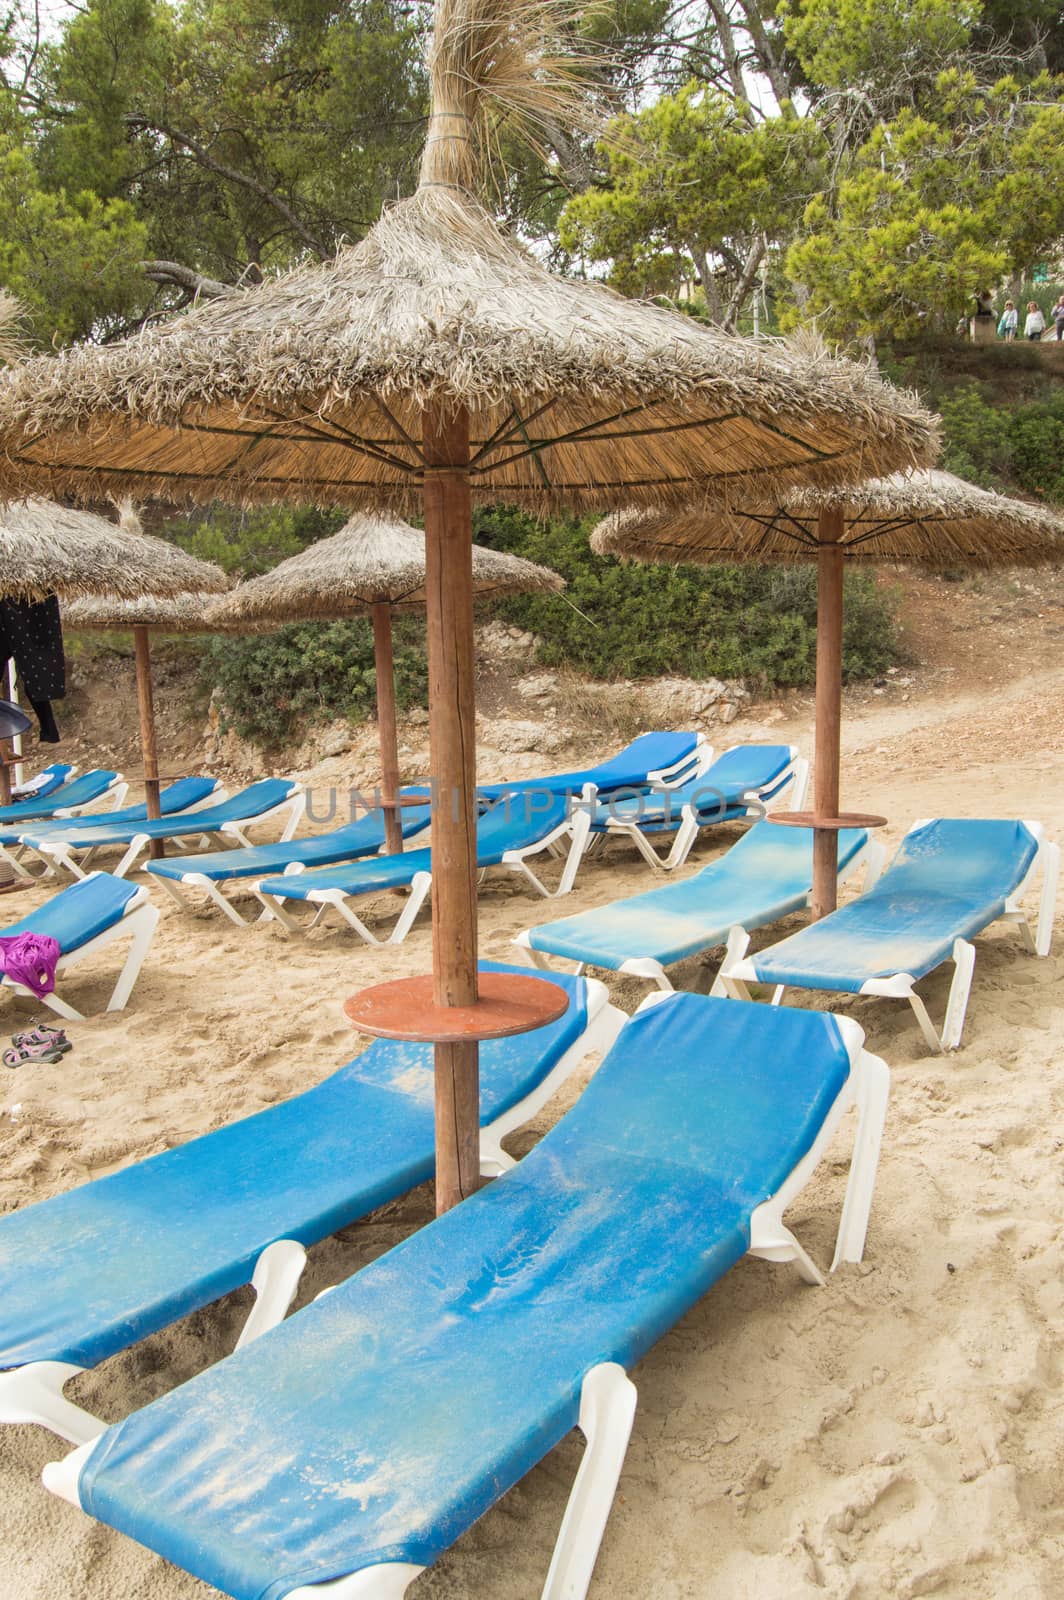 Chaise Lounges and straw umbrellas on the beautiful sandy beach of Palma de Mallorca.